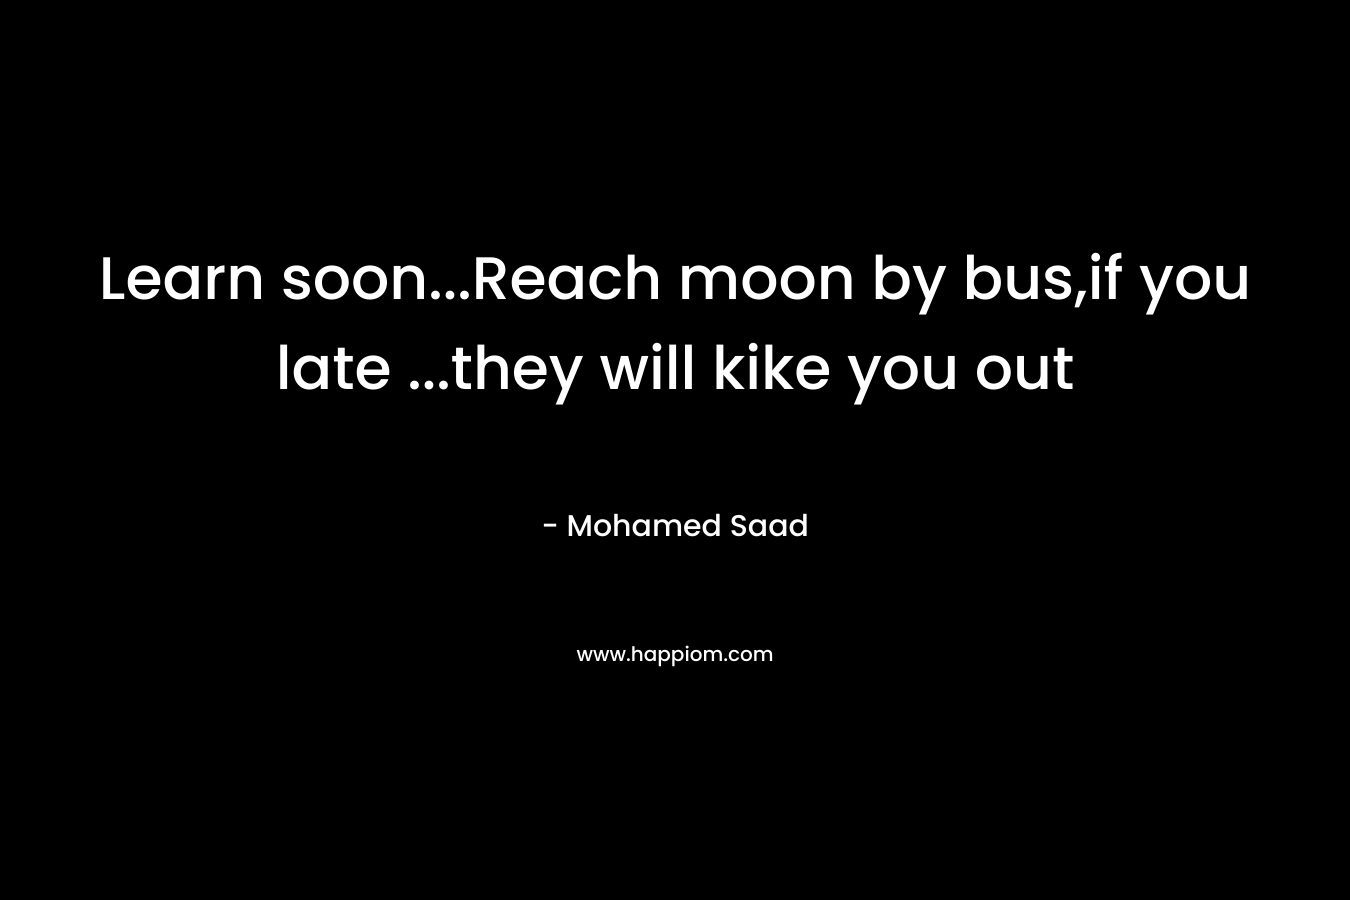 Learn soon...Reach moon by bus,if you late ...they will kike you out